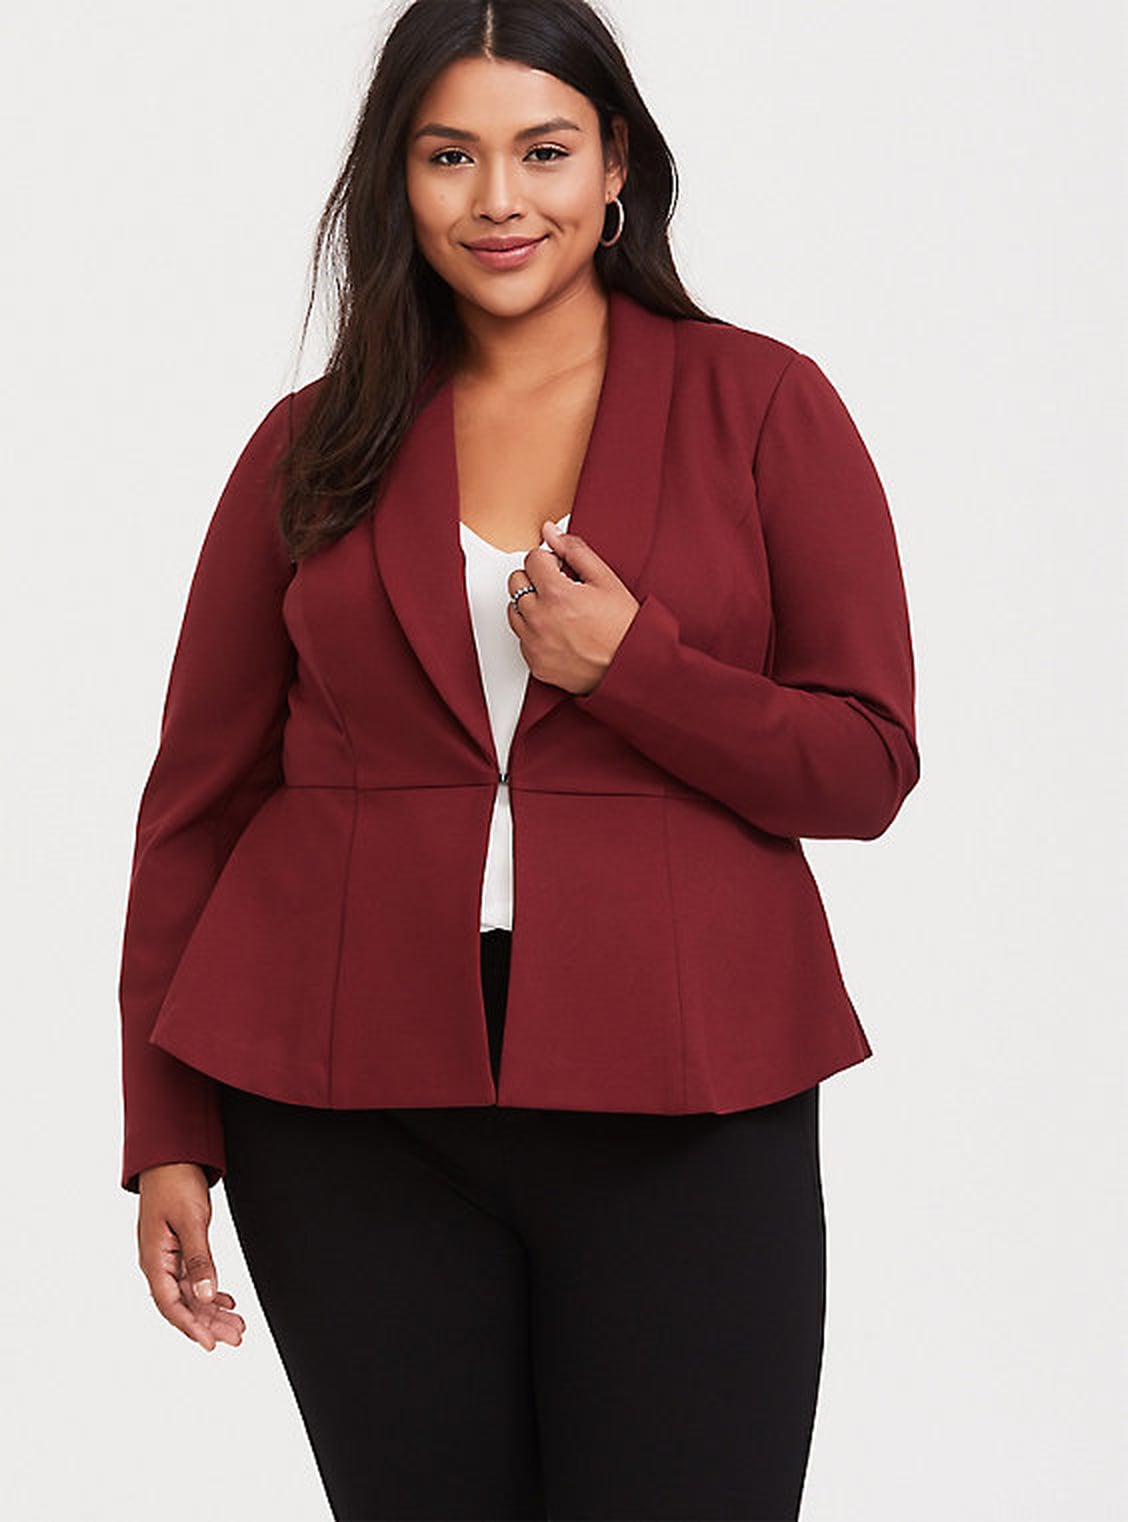 These Are the Best Blazers to Buy For Fall | POPSUGAR Fashion